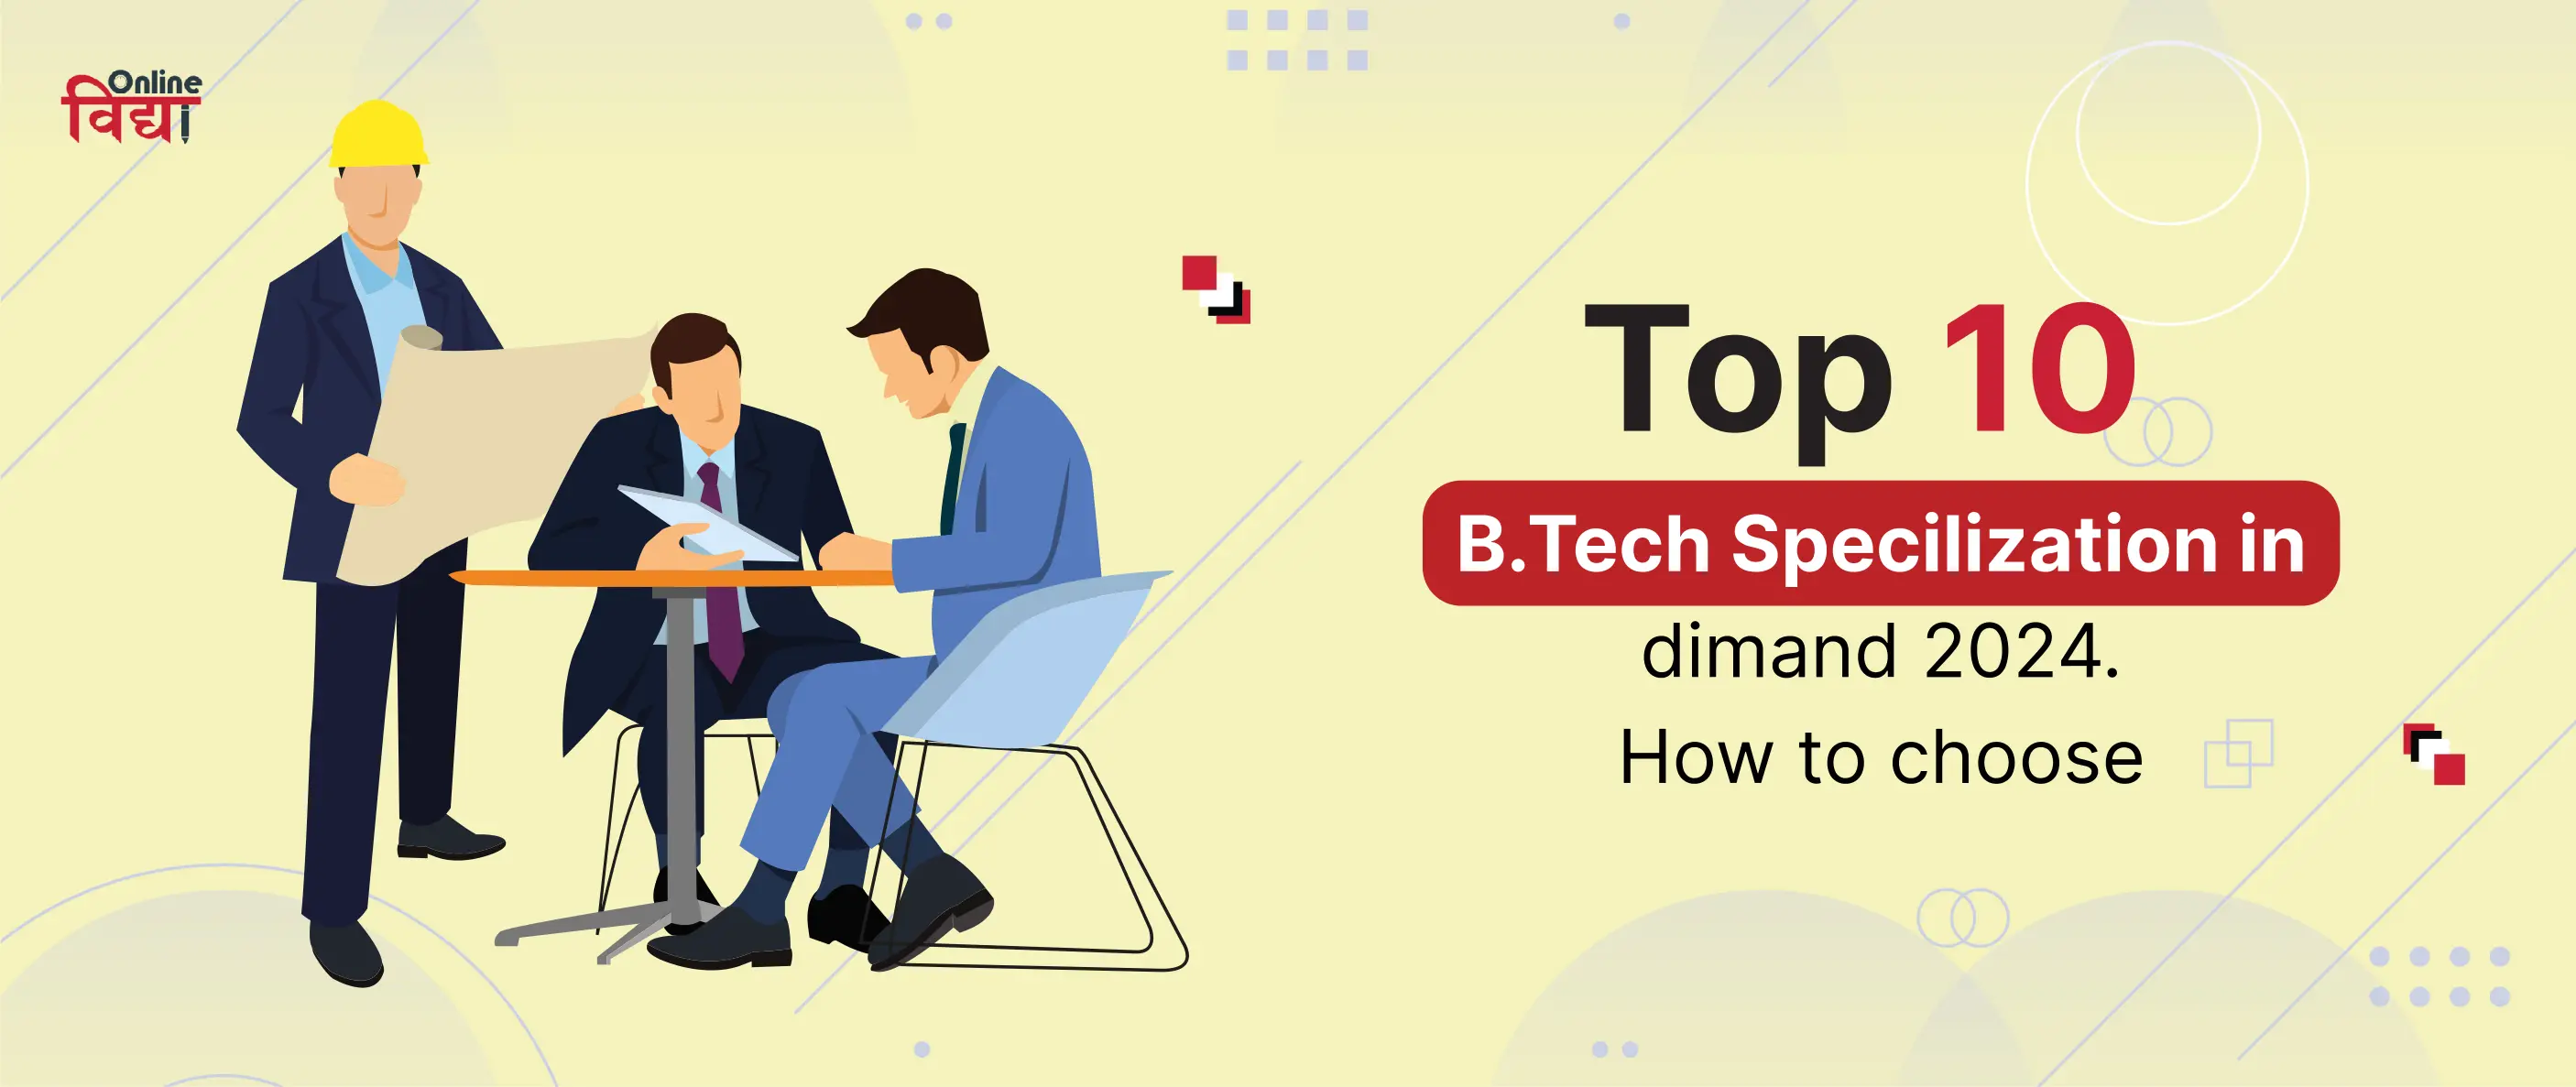 Top 10 B.Tech Specialization in Demand 2024. How to choose